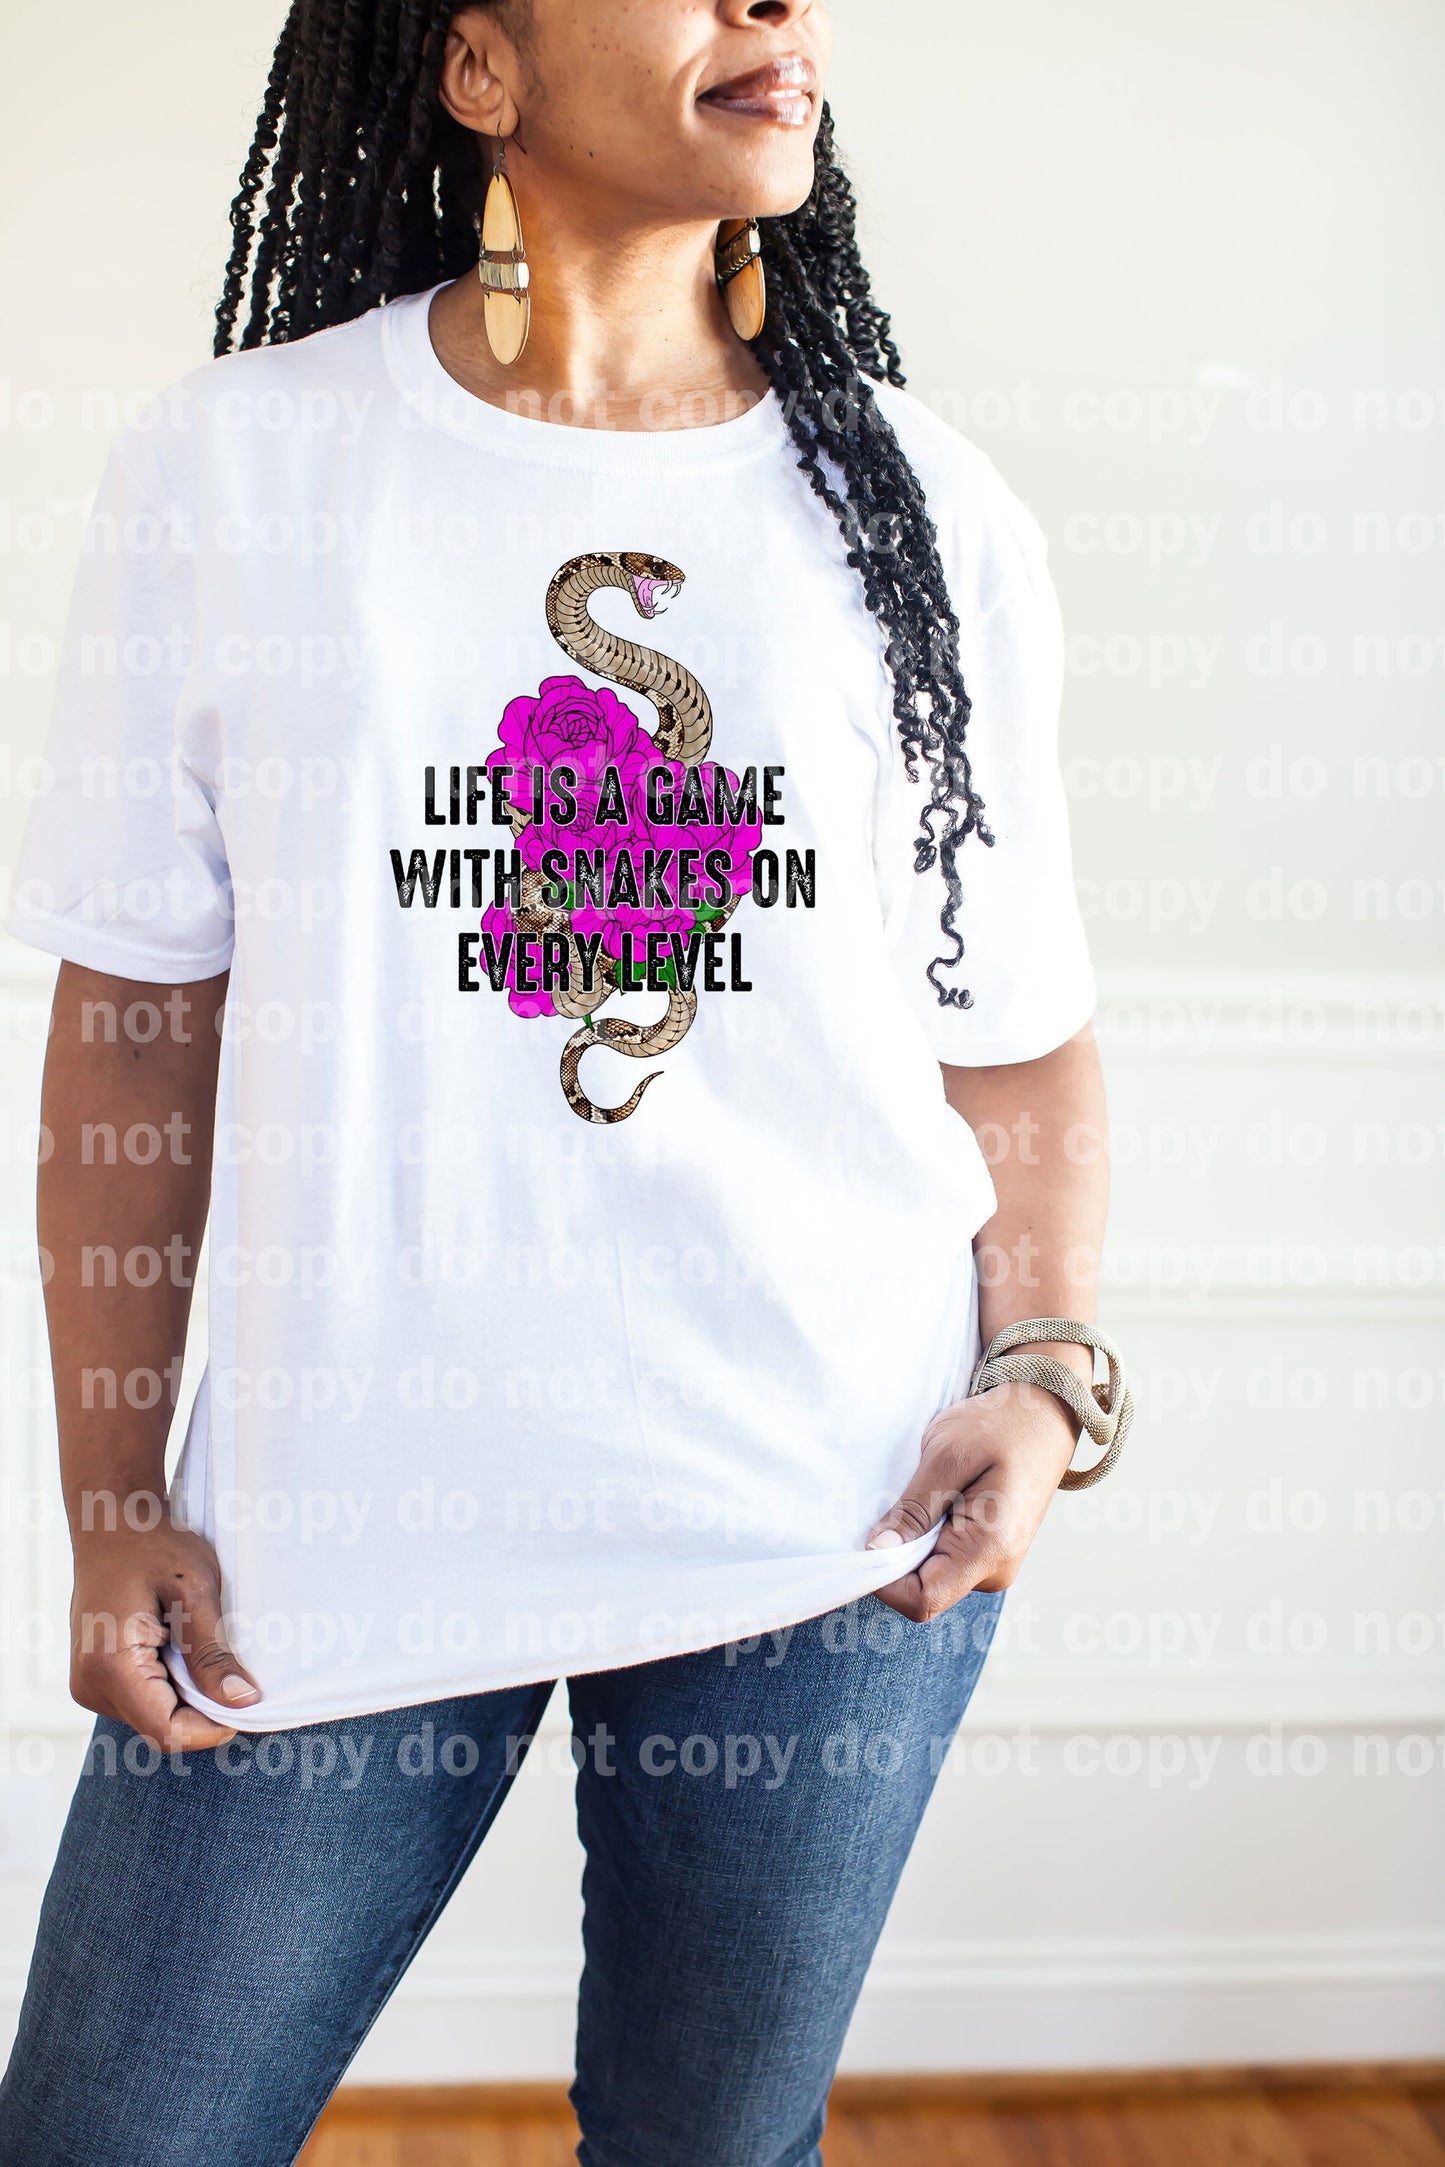 Life Is A Game With Snakes On Every Level Black/White Dream Print or Sublimation Print